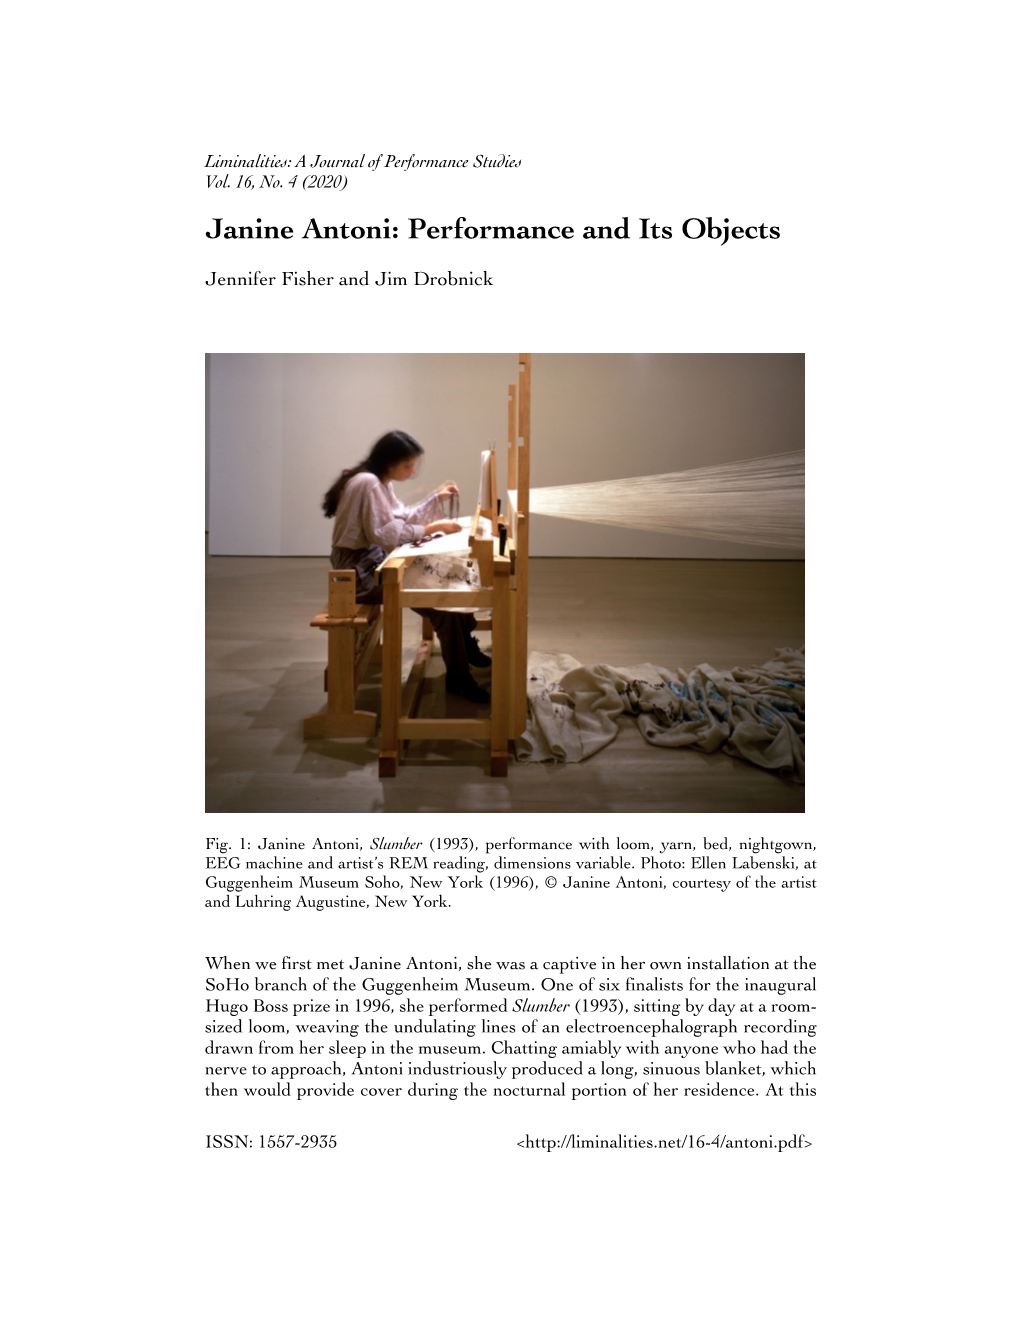 Janine Antoni: Performance and Its Objects